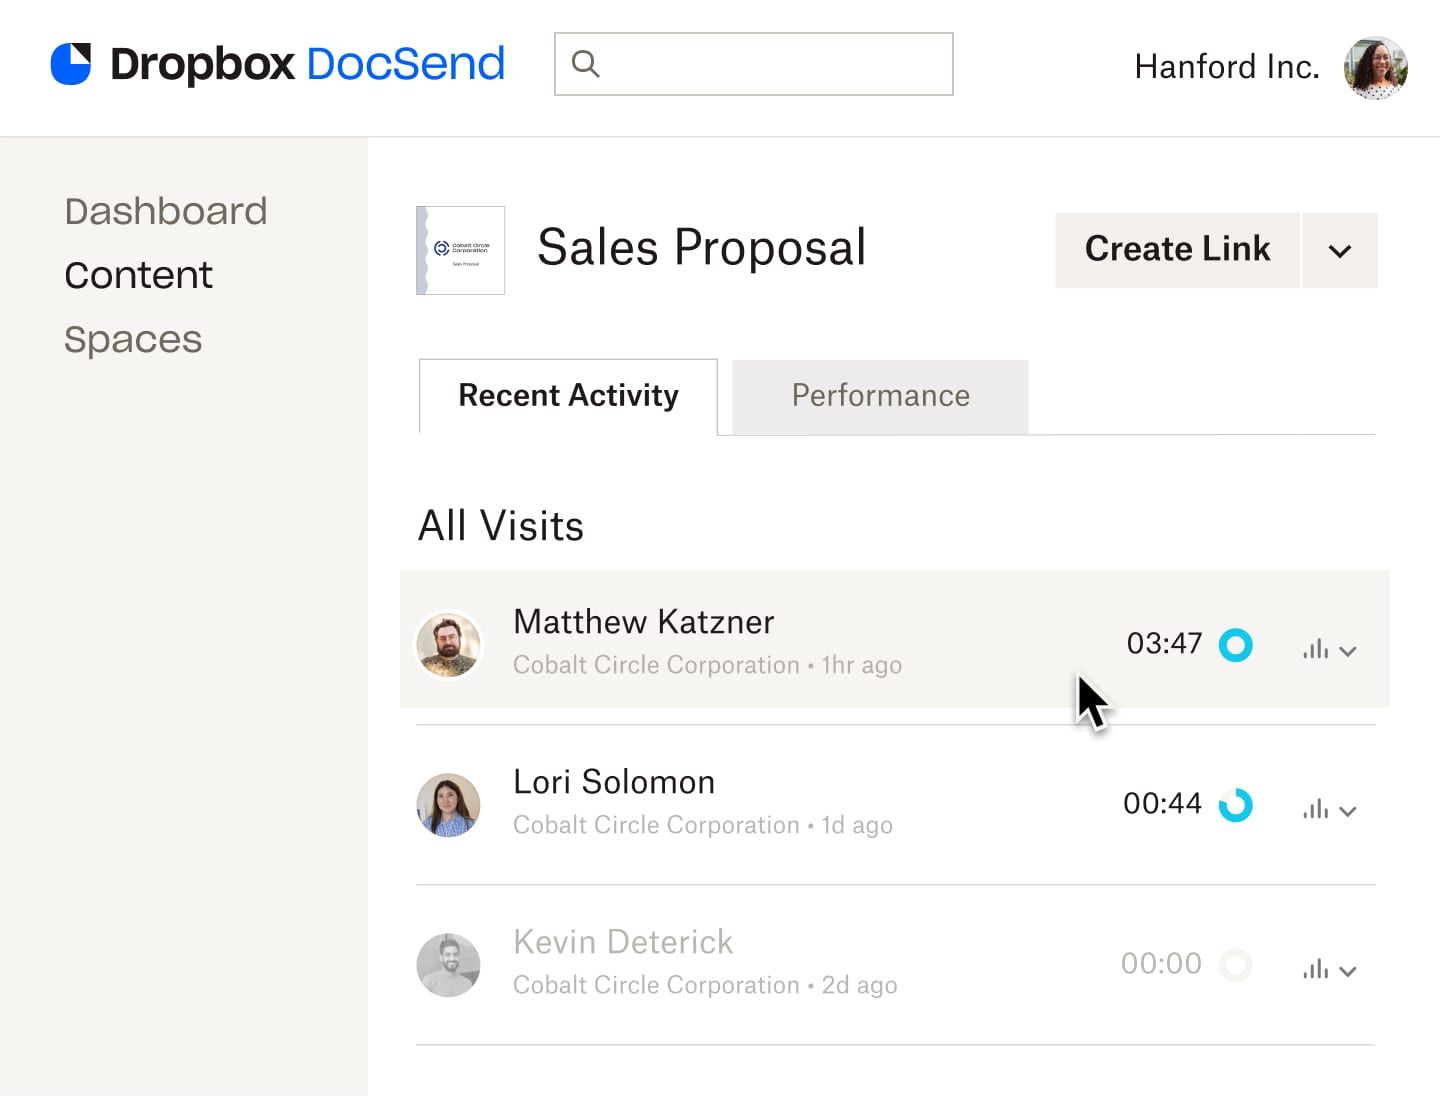 The ‘Recent Activity’ tab in DocSend that shows a list of people who have viewed the sales proposal deck, with the amount of time they each spent in the deck